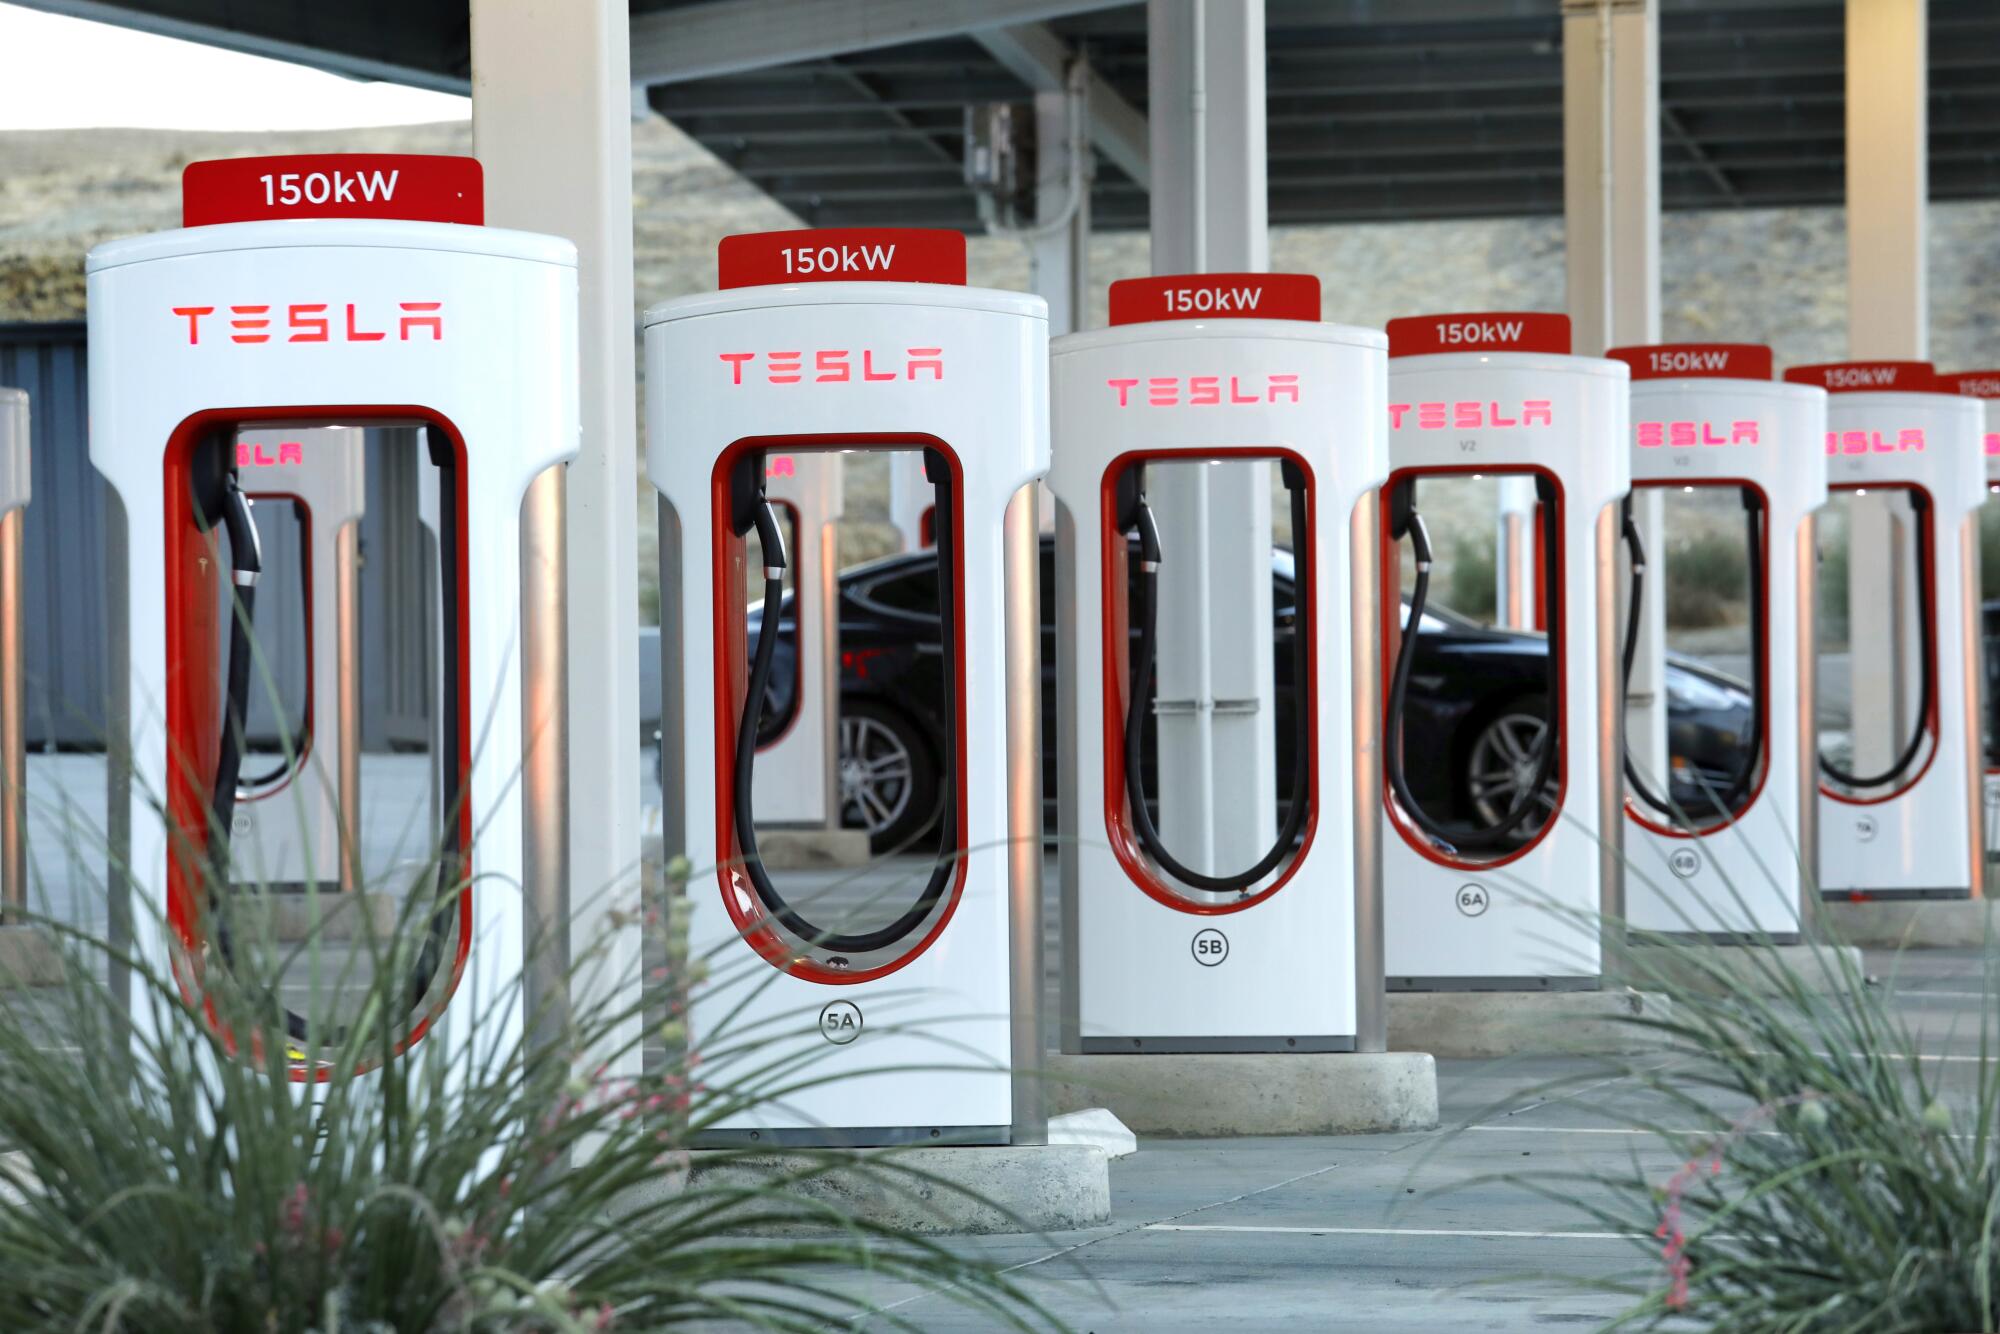 A row of red and white Tesla vehicle chargers.